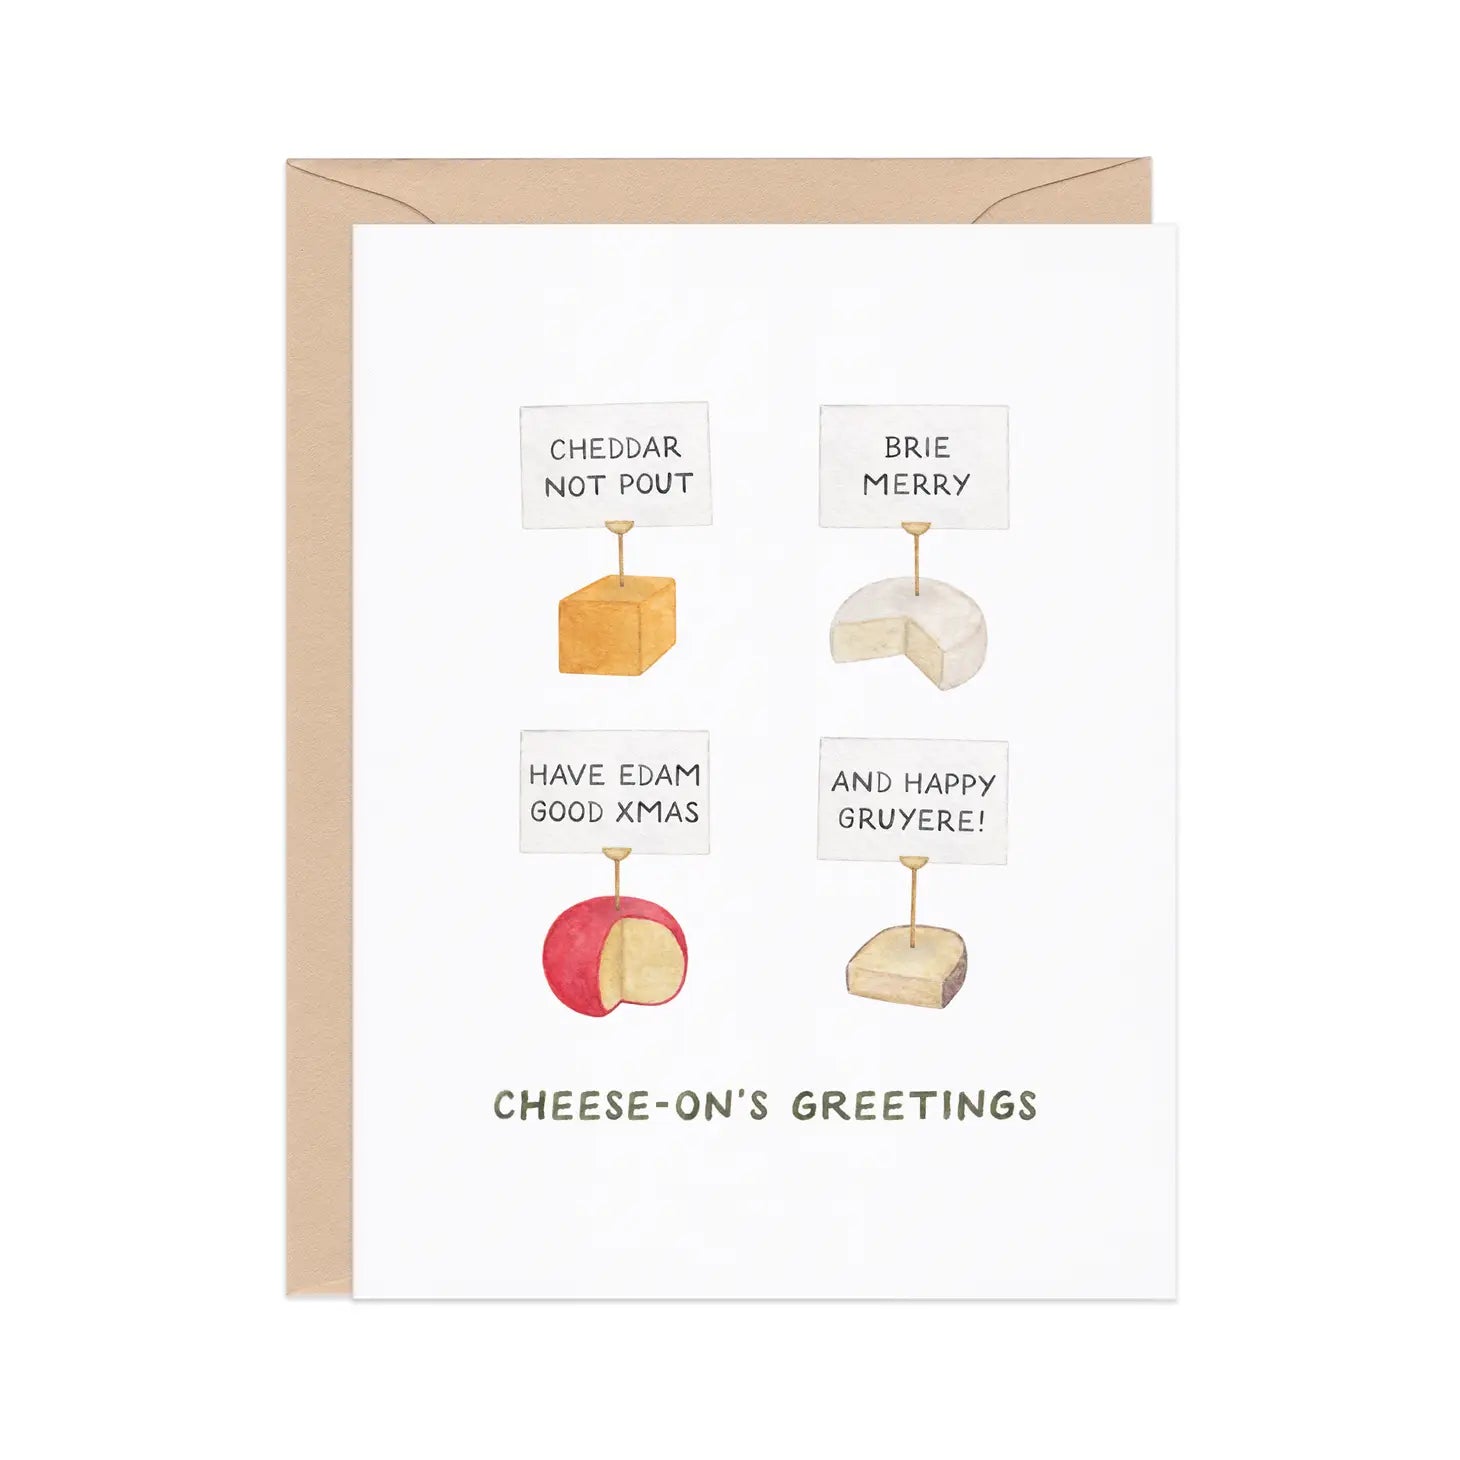 Cheesy Holiday Greeting Cards Cheese-on's Greetings - BKLYN Larder